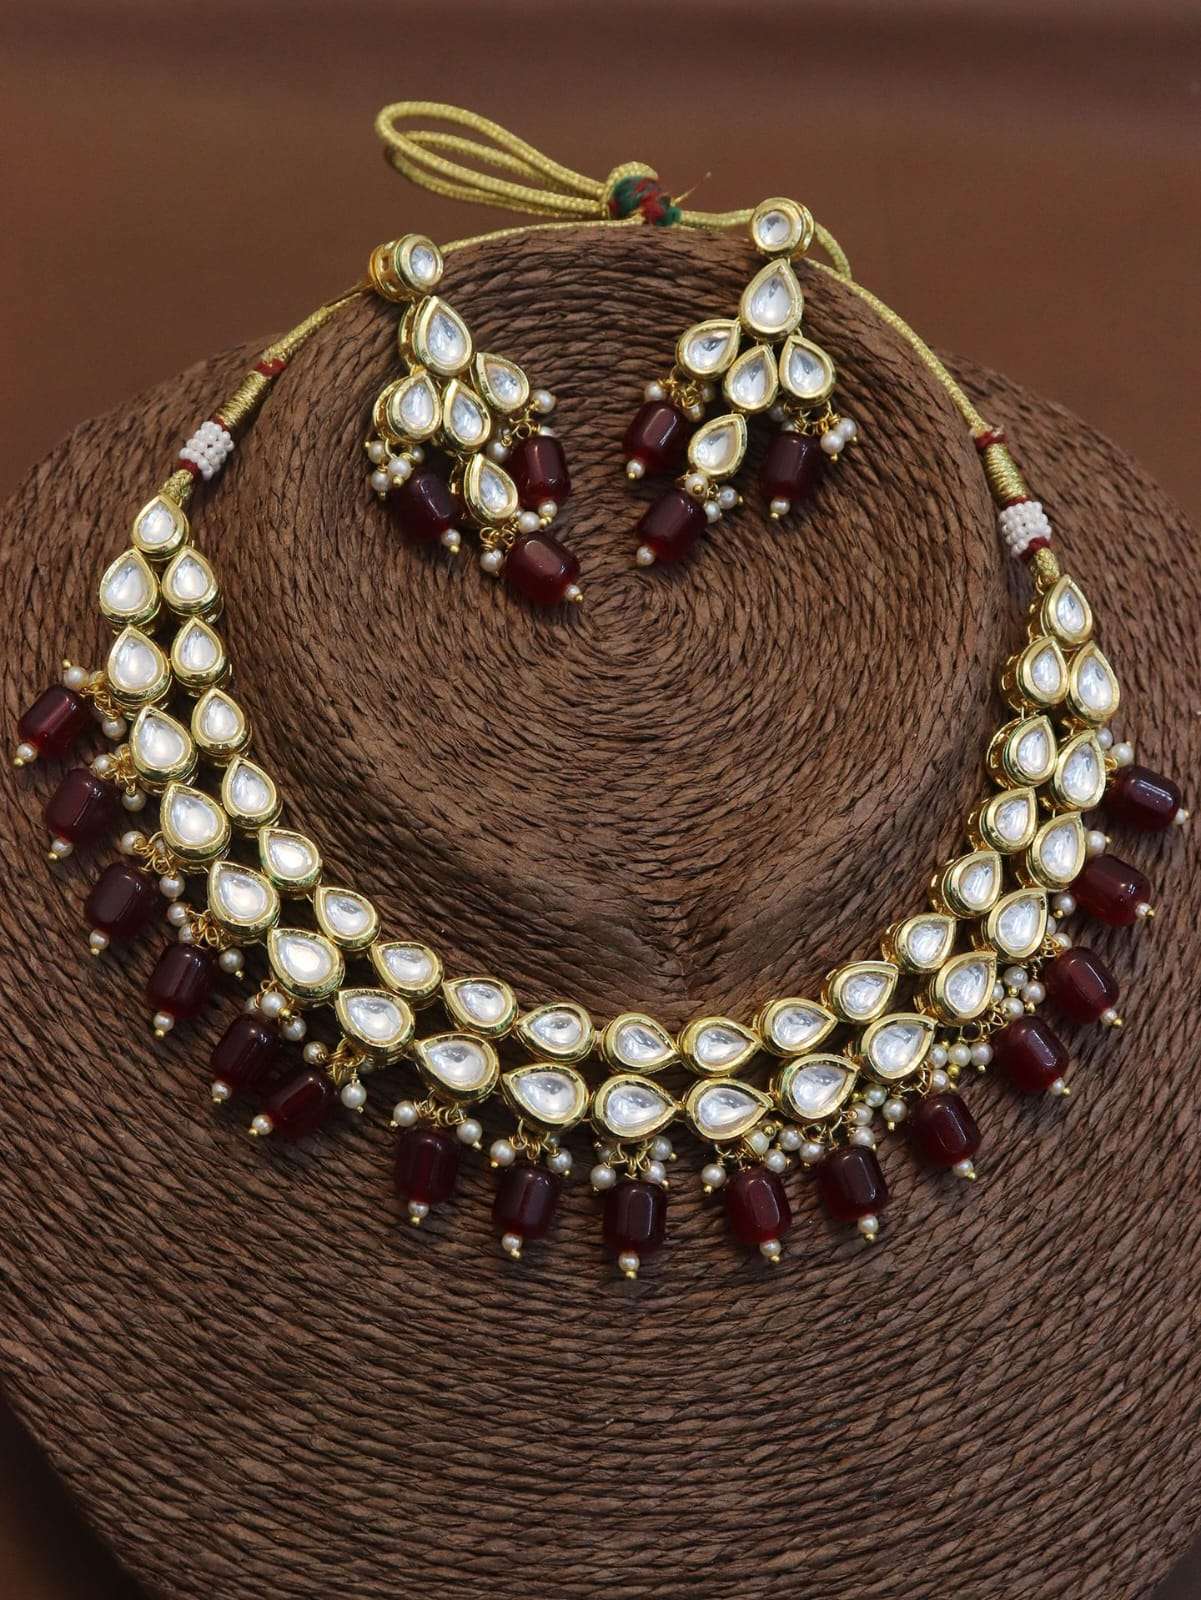 S-701 BY FASHID WHOLESALE 01 TO 07 SERIES TRADITIONAL ARTIFICIAL JEWELLERY FOR INDIAN ATTIRE AT EXCLUSIVE RANGE.